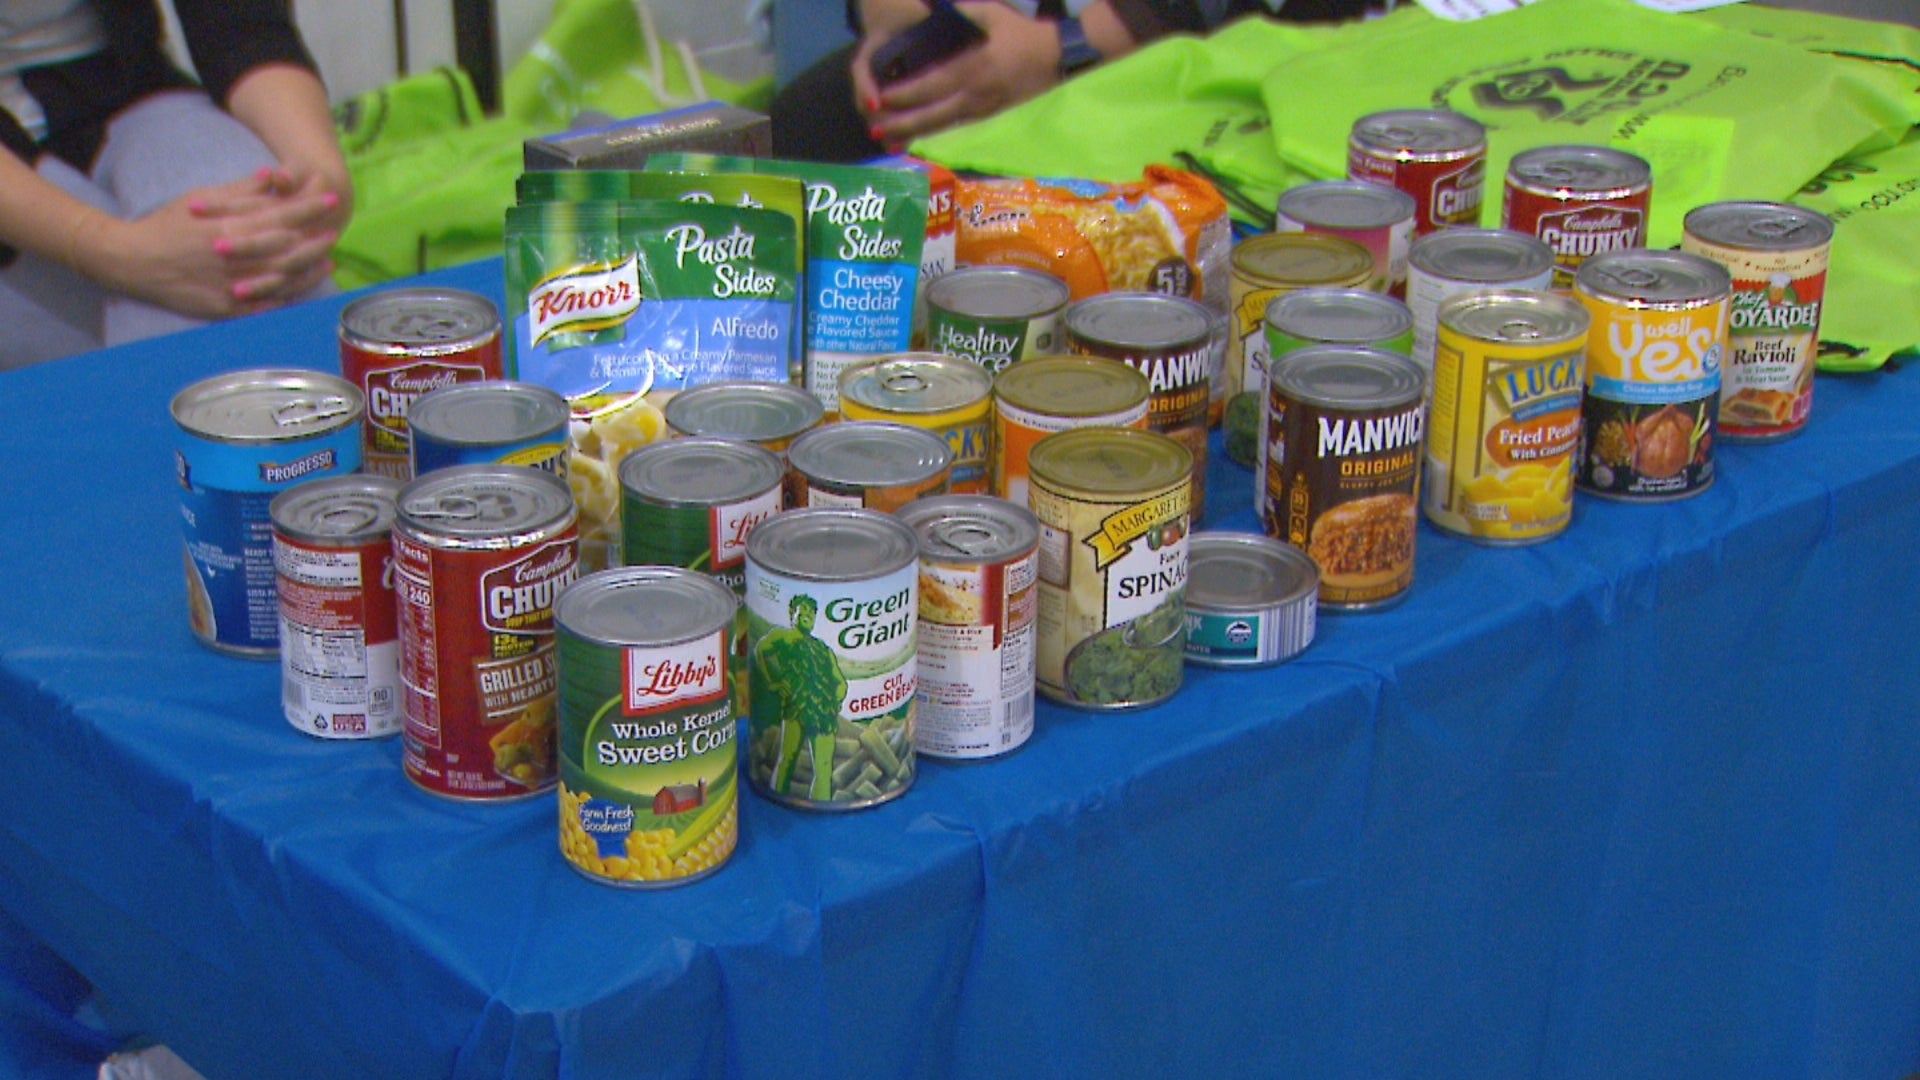 Food drive to help tackle food insecurity in Indy, central Indiana